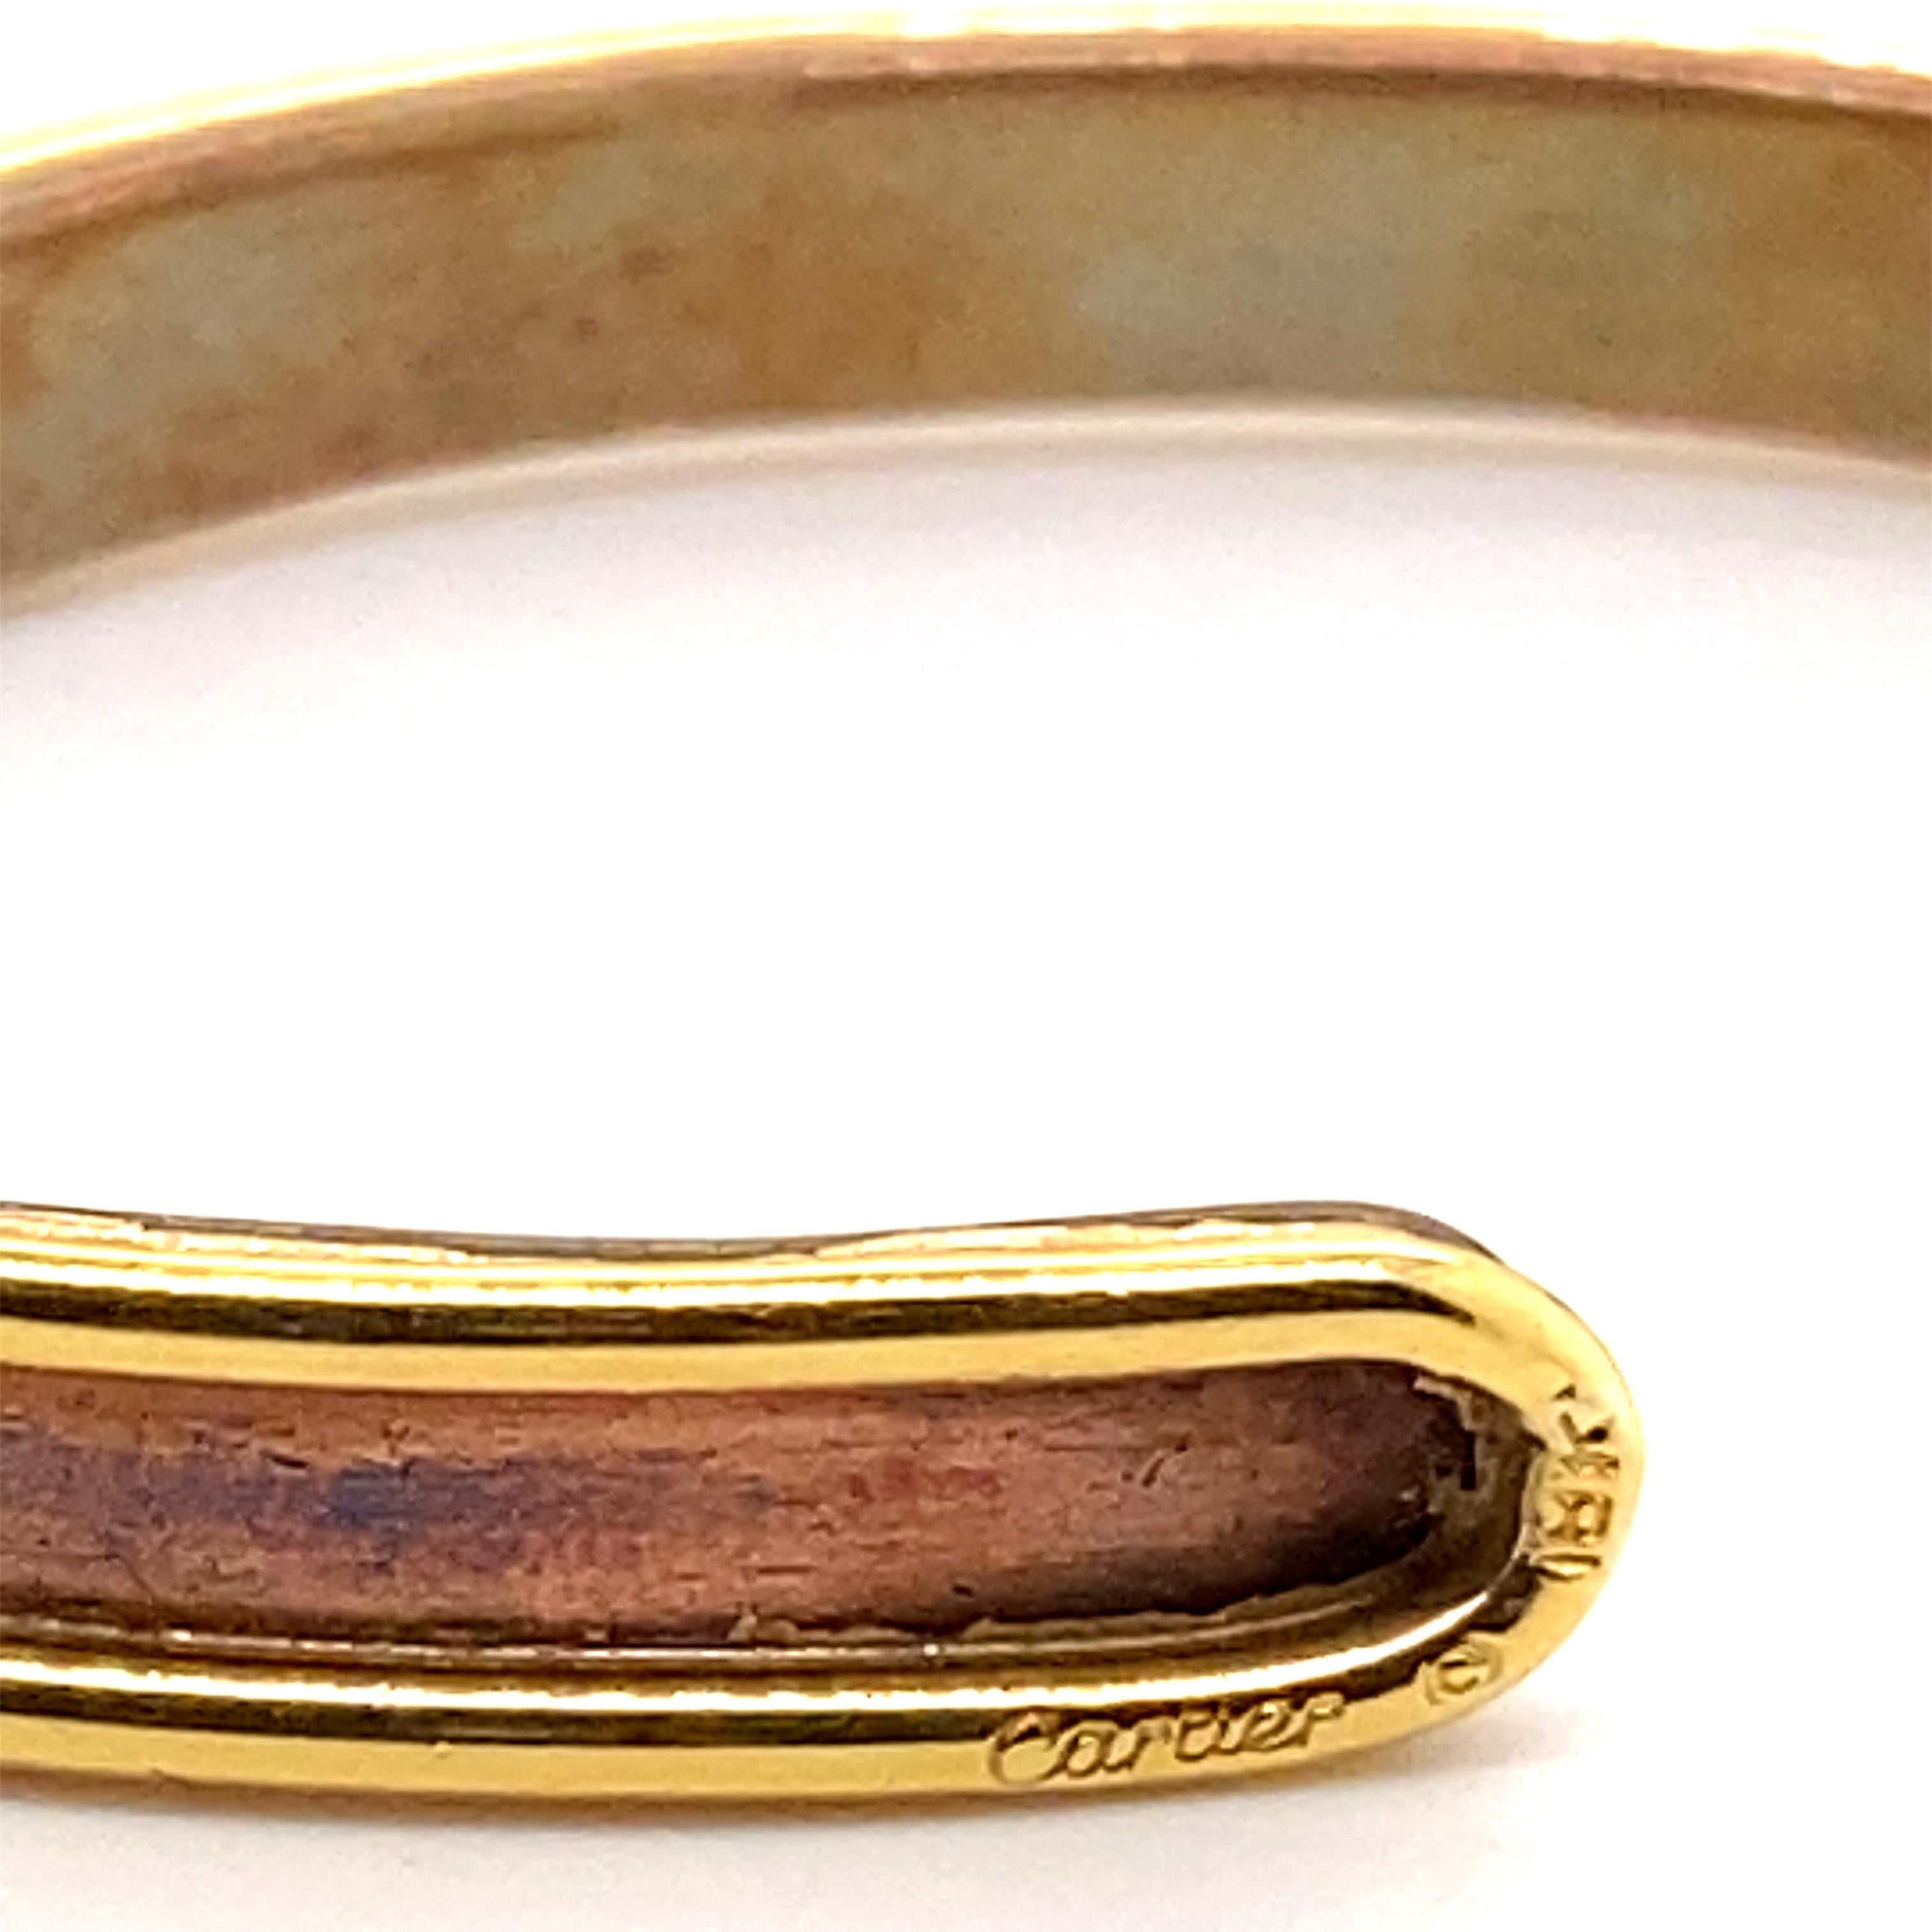 A vintage Cartier Sabona cuff bracelet in 18 karat yellow gold & copper, circa 1970.

Sabona was established in 1959 in New York, and in 1970, the design, a collaboration with Cartier
New York, was released. This model was sold out as soon as it was